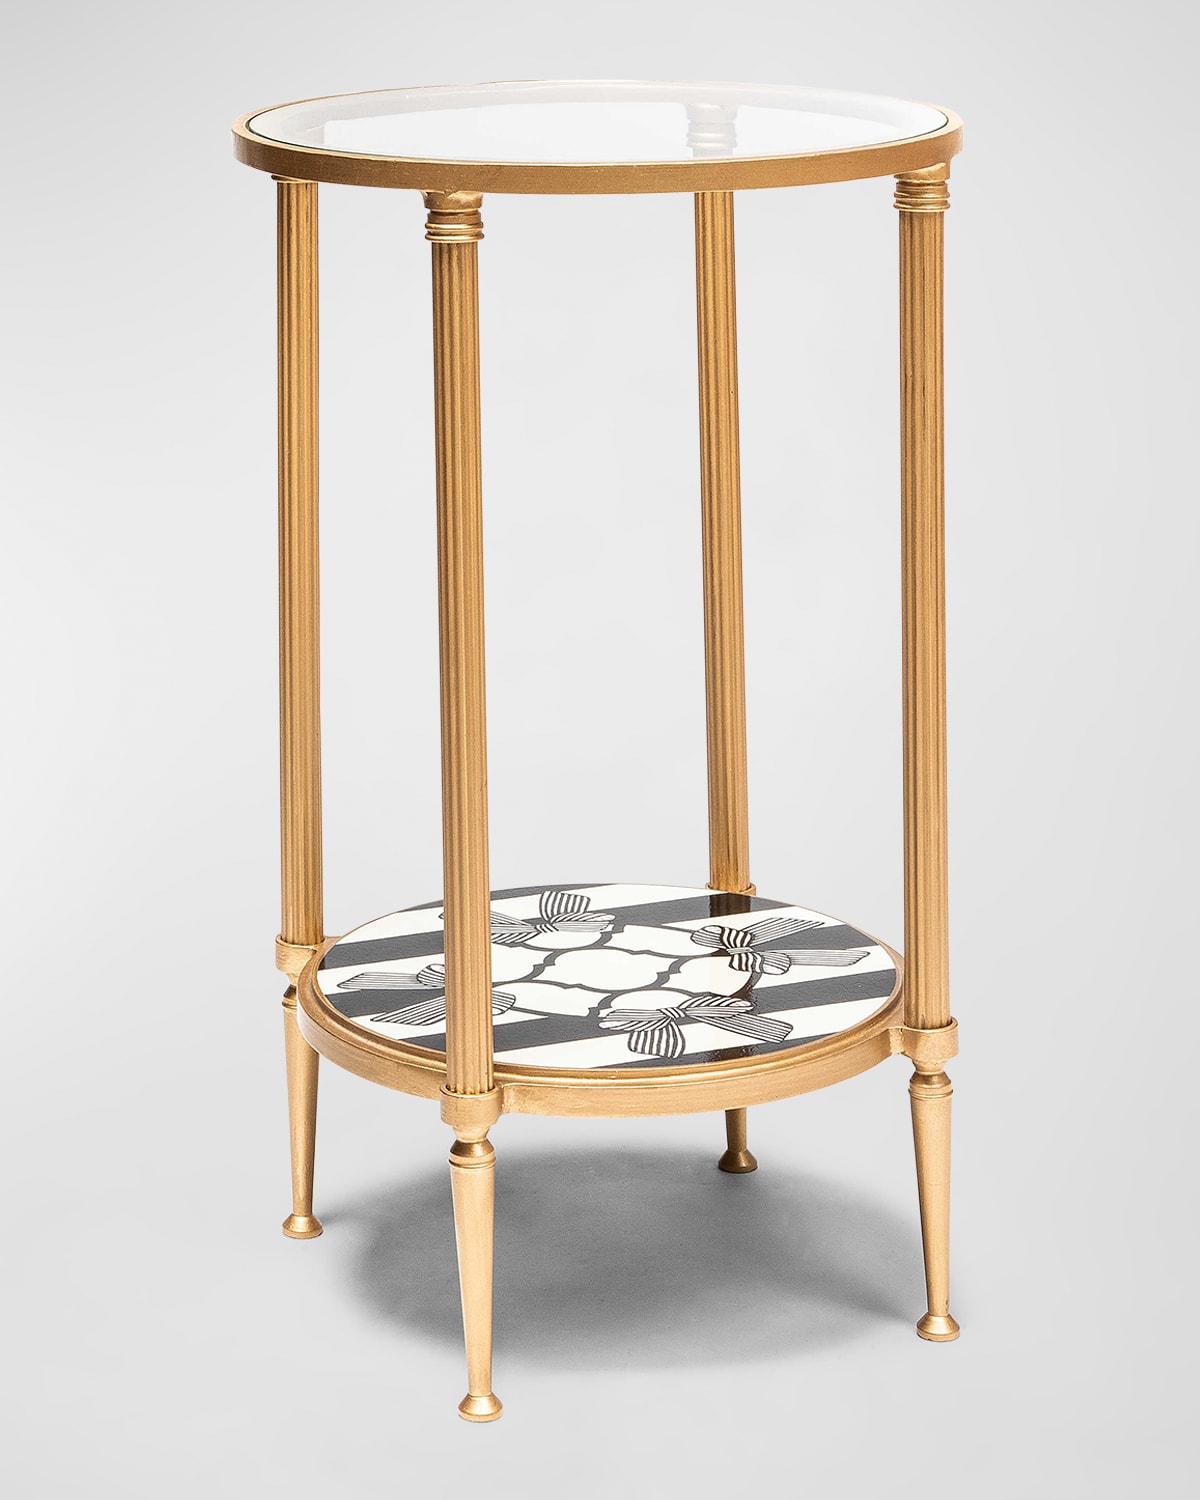 Mackenzie-childs Pretty As A Bow Accent Table